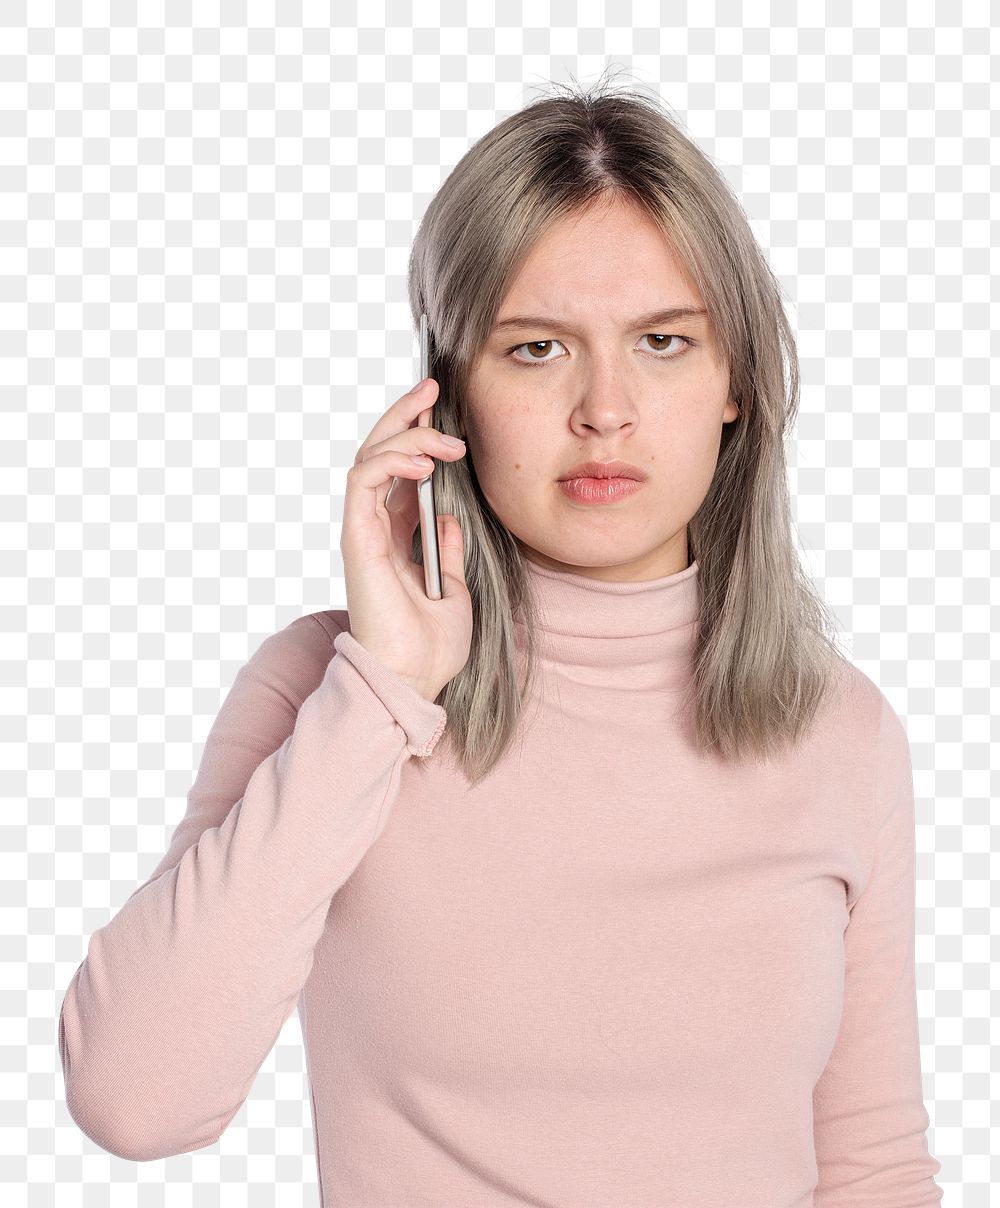 Annoyed woman png mockup on a call